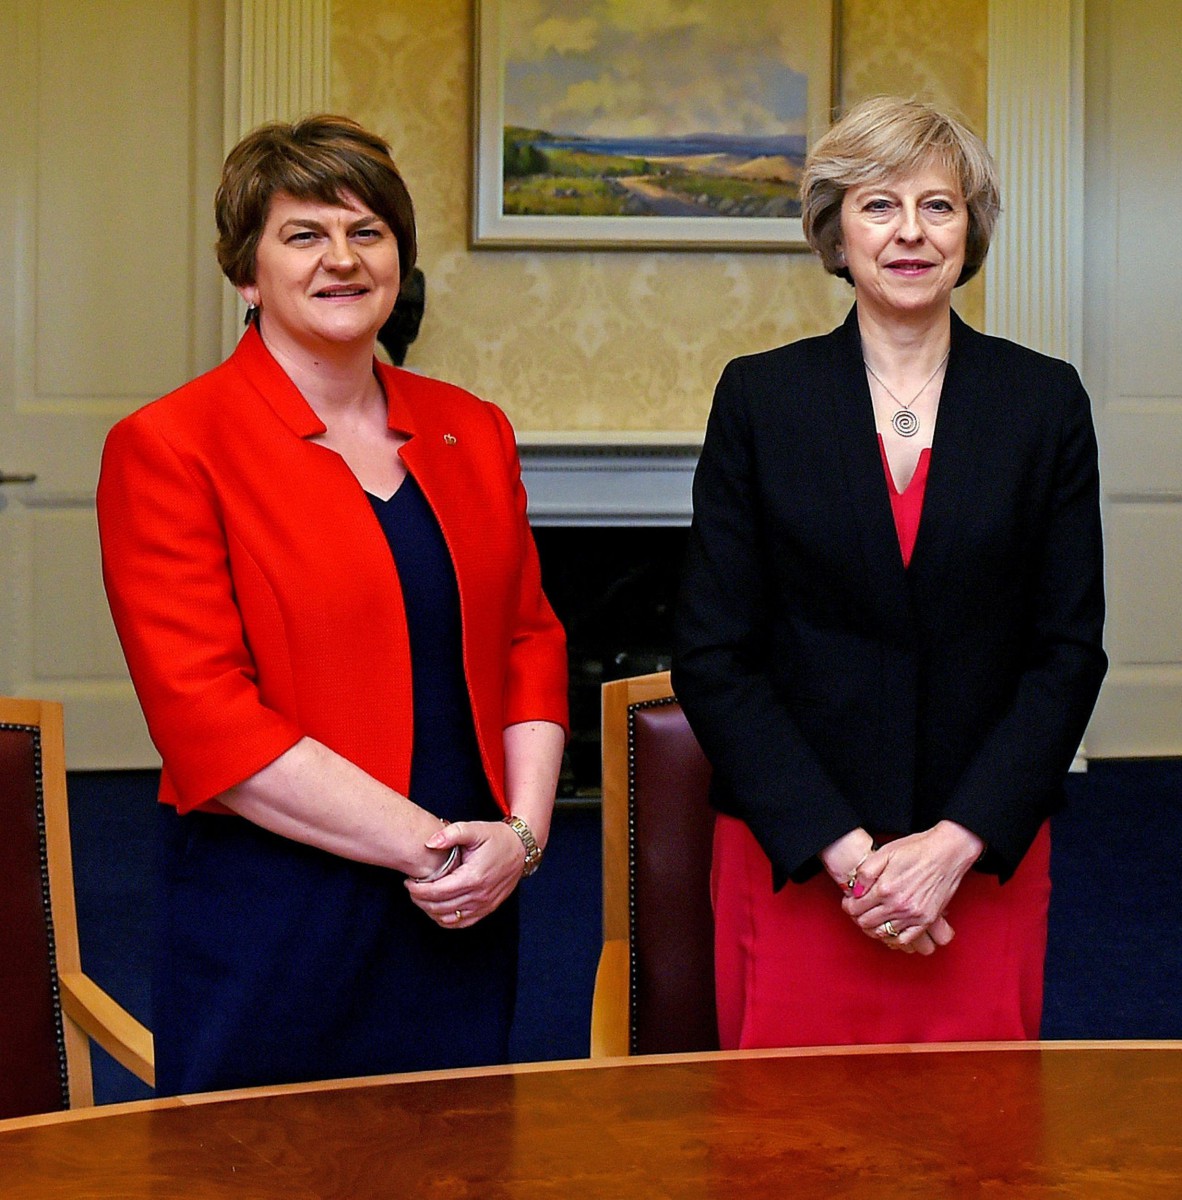 Democratic Unionist Party leader Arlene Foster with Theresa May in 2016